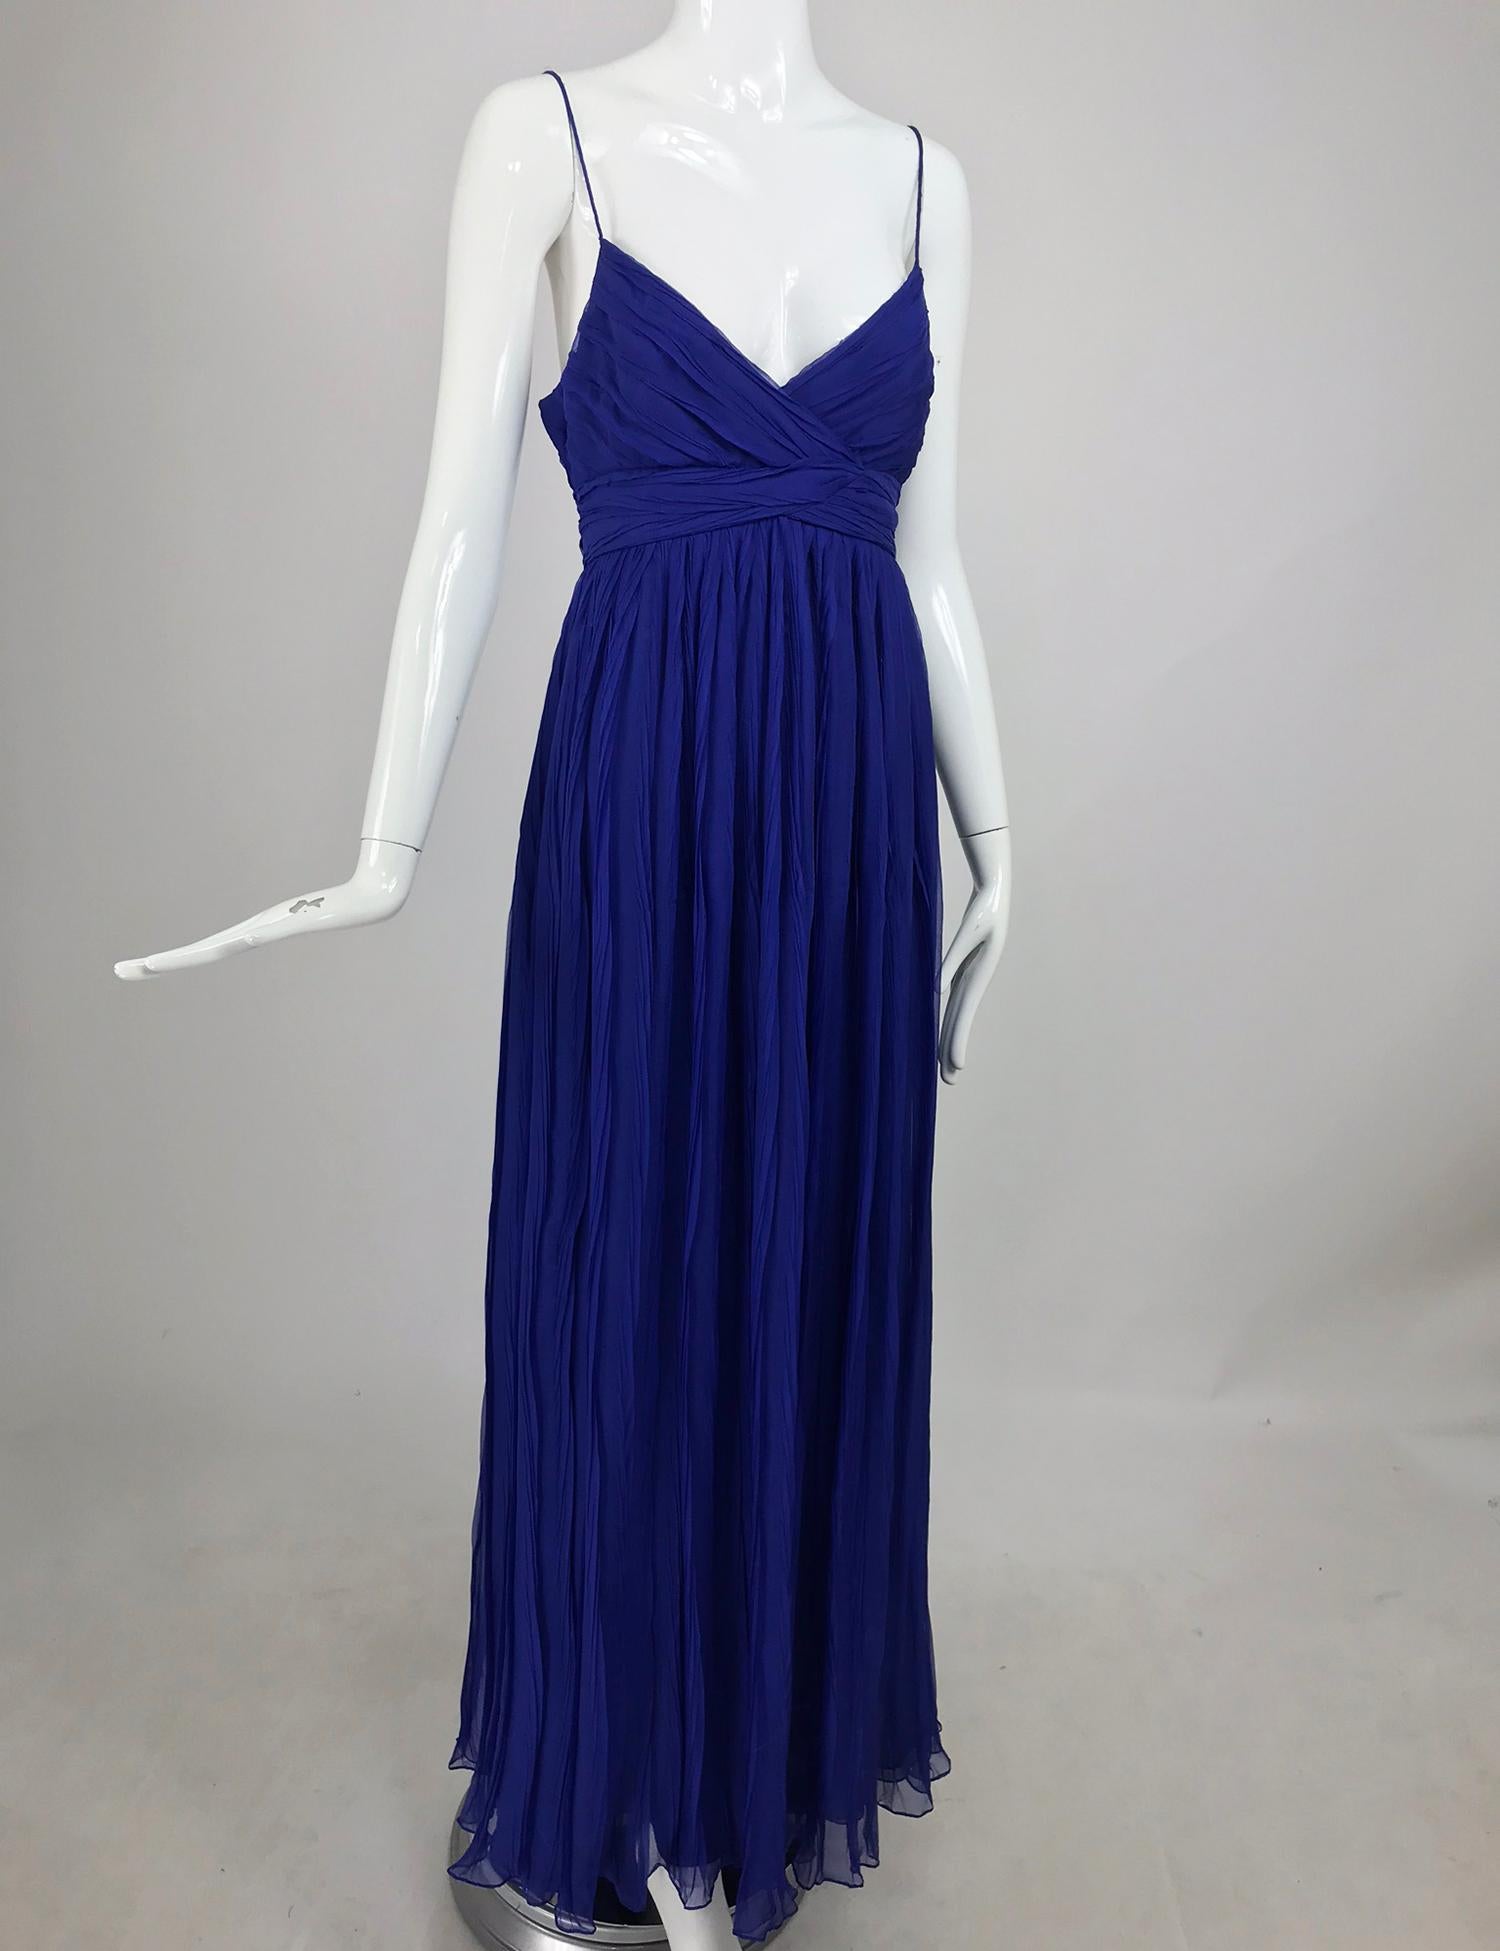 Jay Ahr pleated blue silk evening gown. This is such a gorgeous shade of blue a cross between cornflower and sapphire. The sheer silk is irregularly pleated giving interesting texture and dimension. The bodice is crossed at the front and the upper